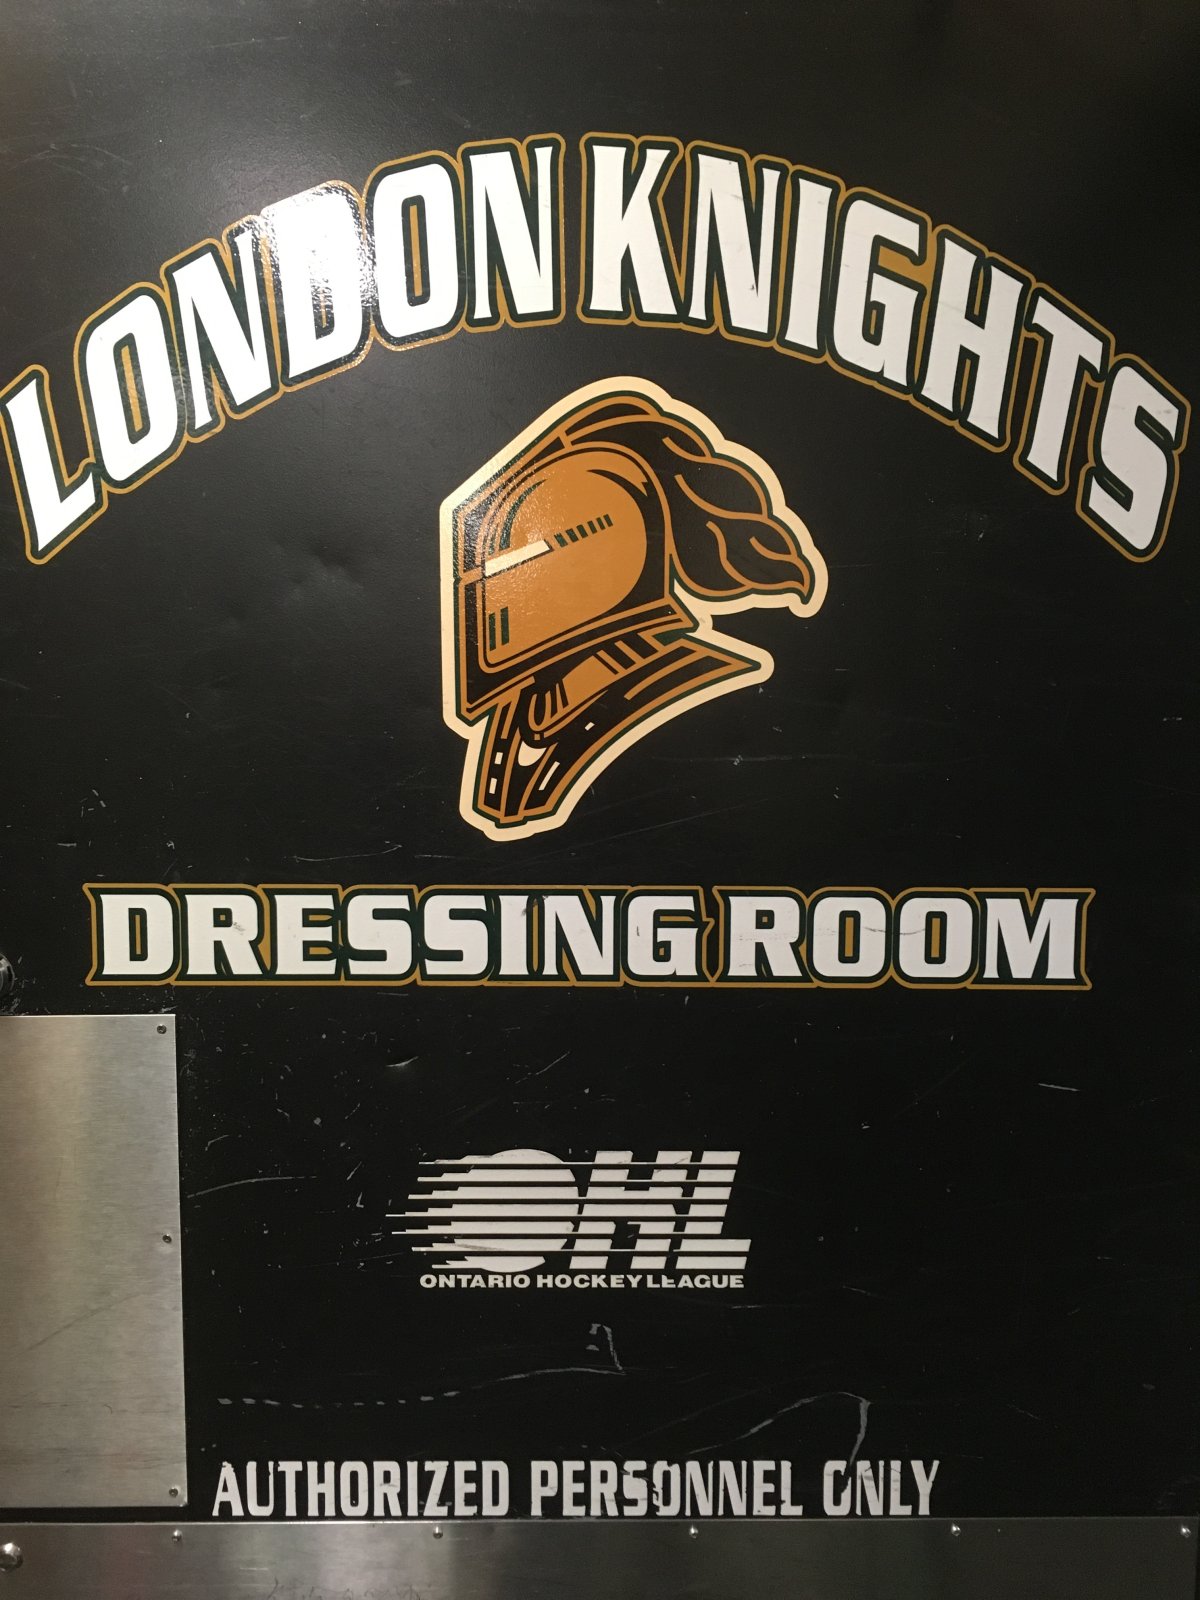 London Knights blanked by Kingston Frontenacs - image